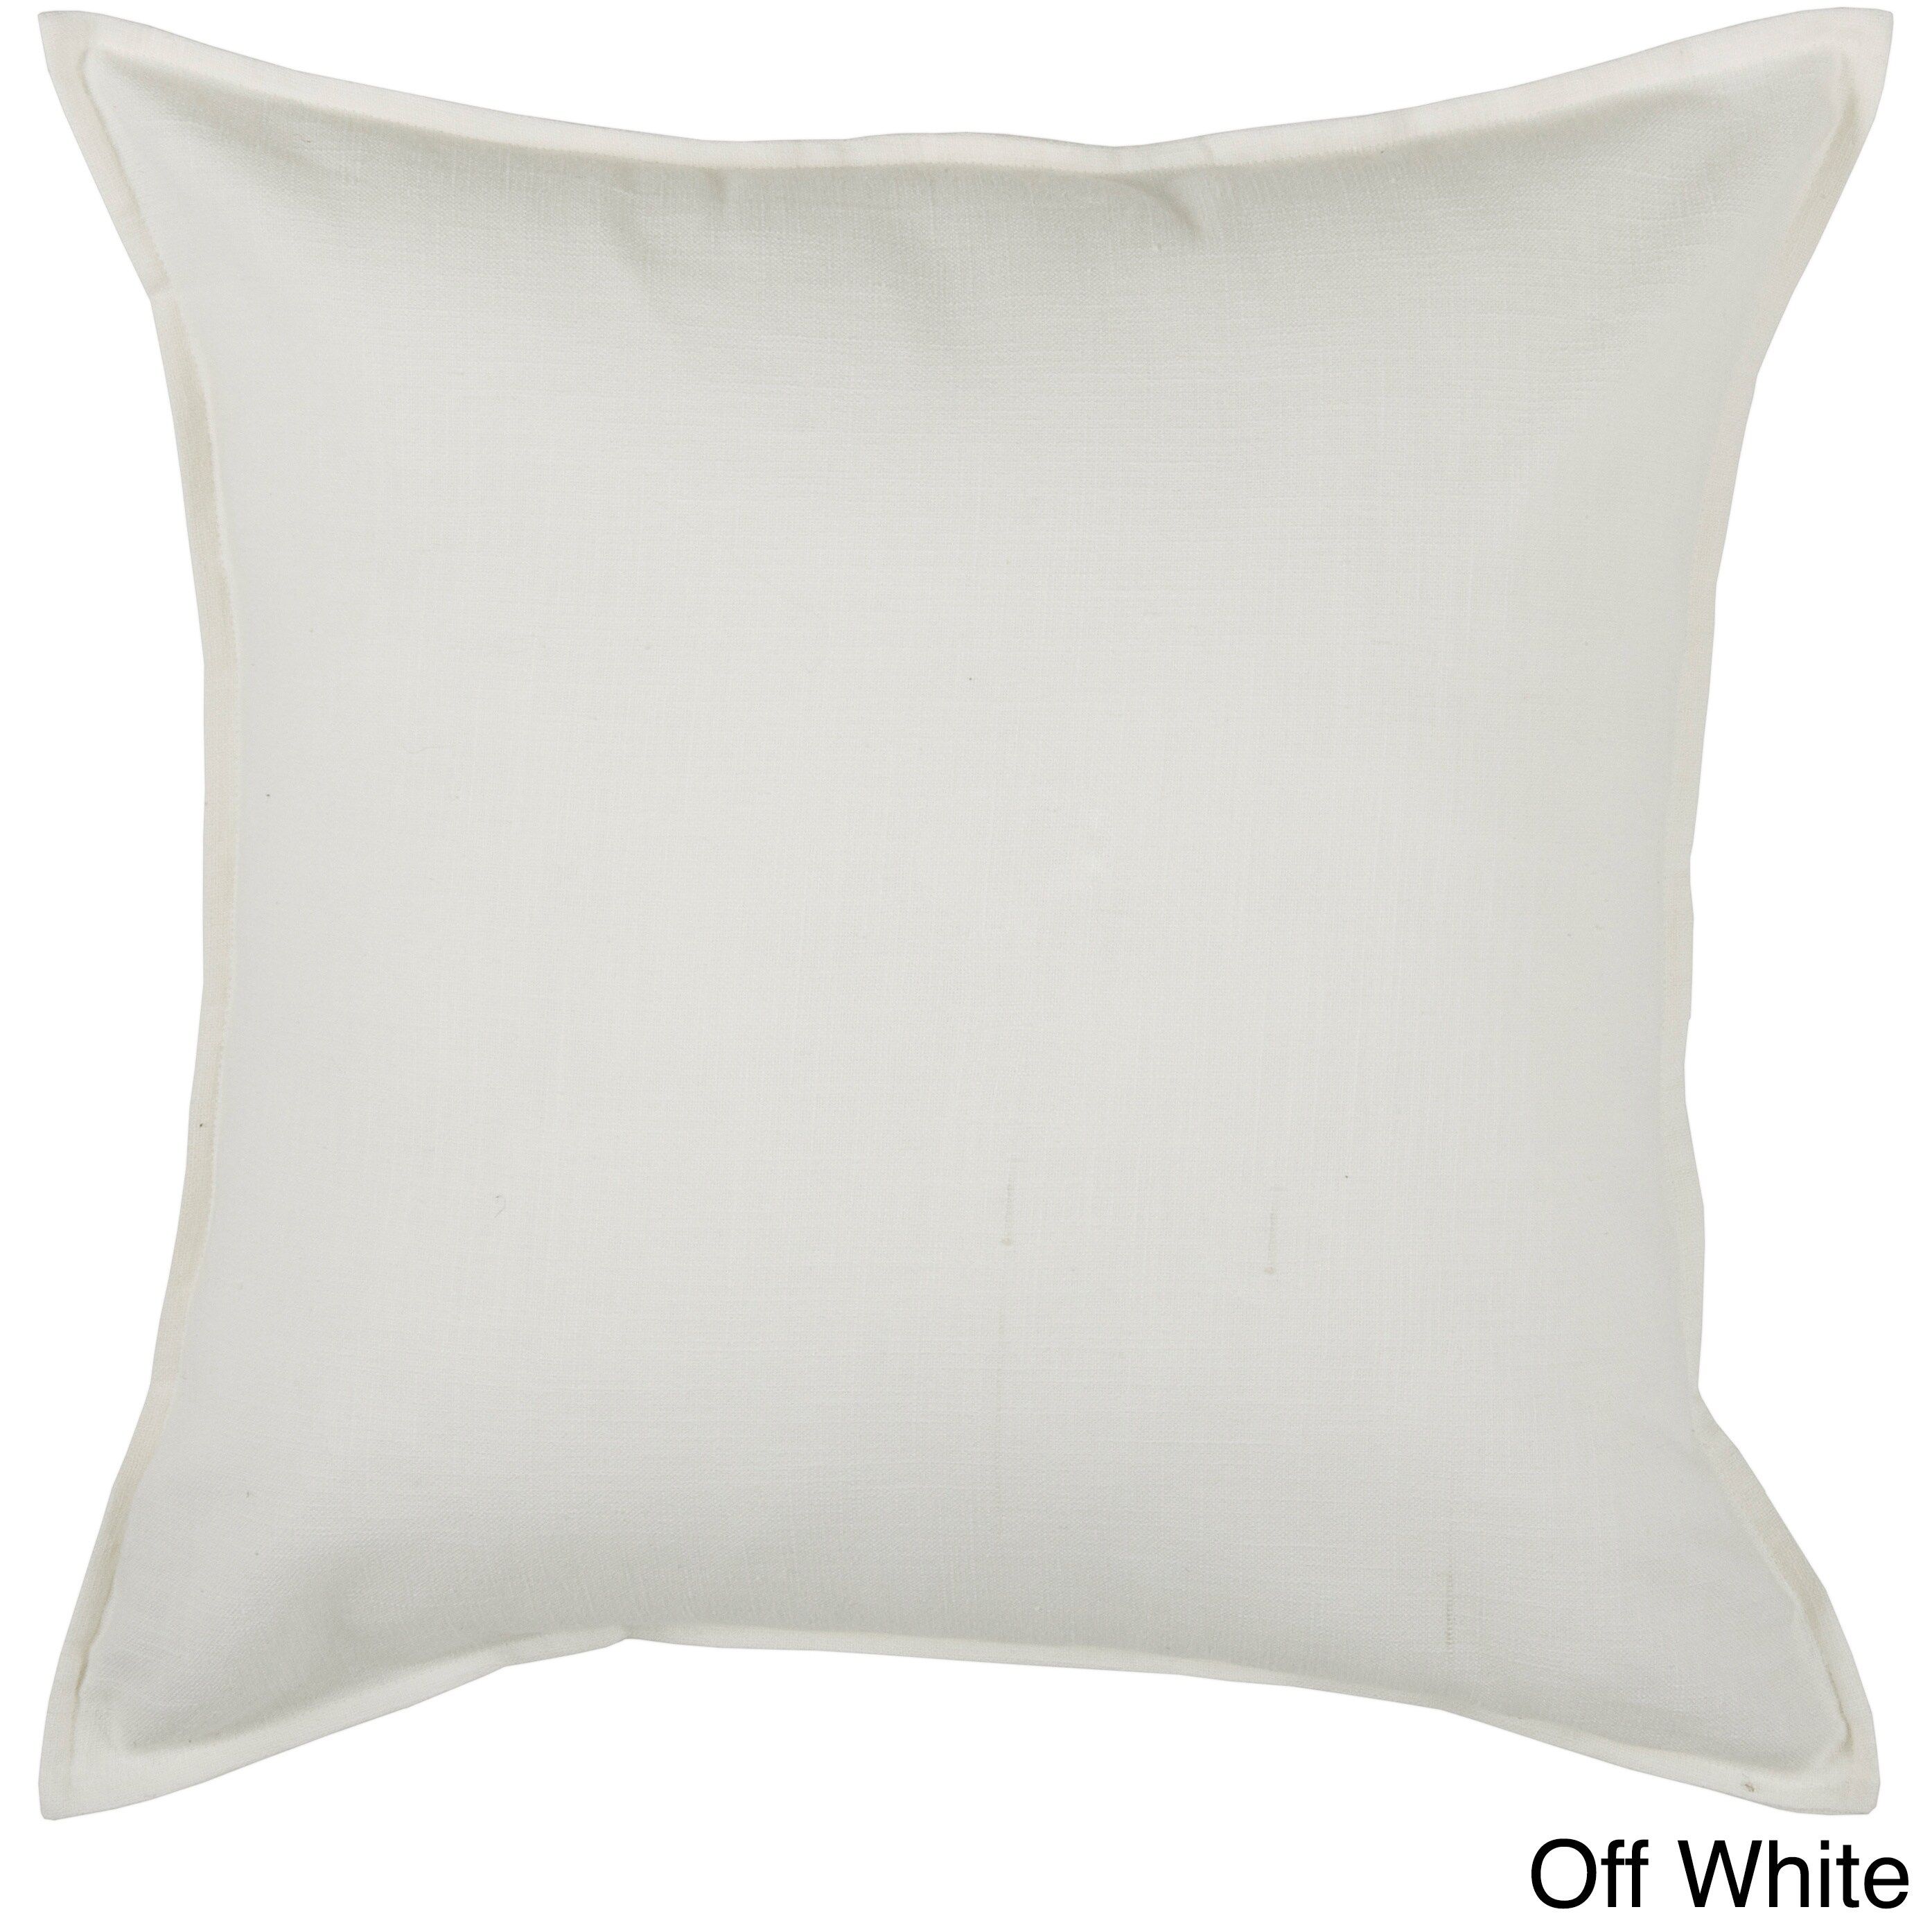 Rizzy Home 20-inch Solid Throw Pillow | Bed Bath & Beyond